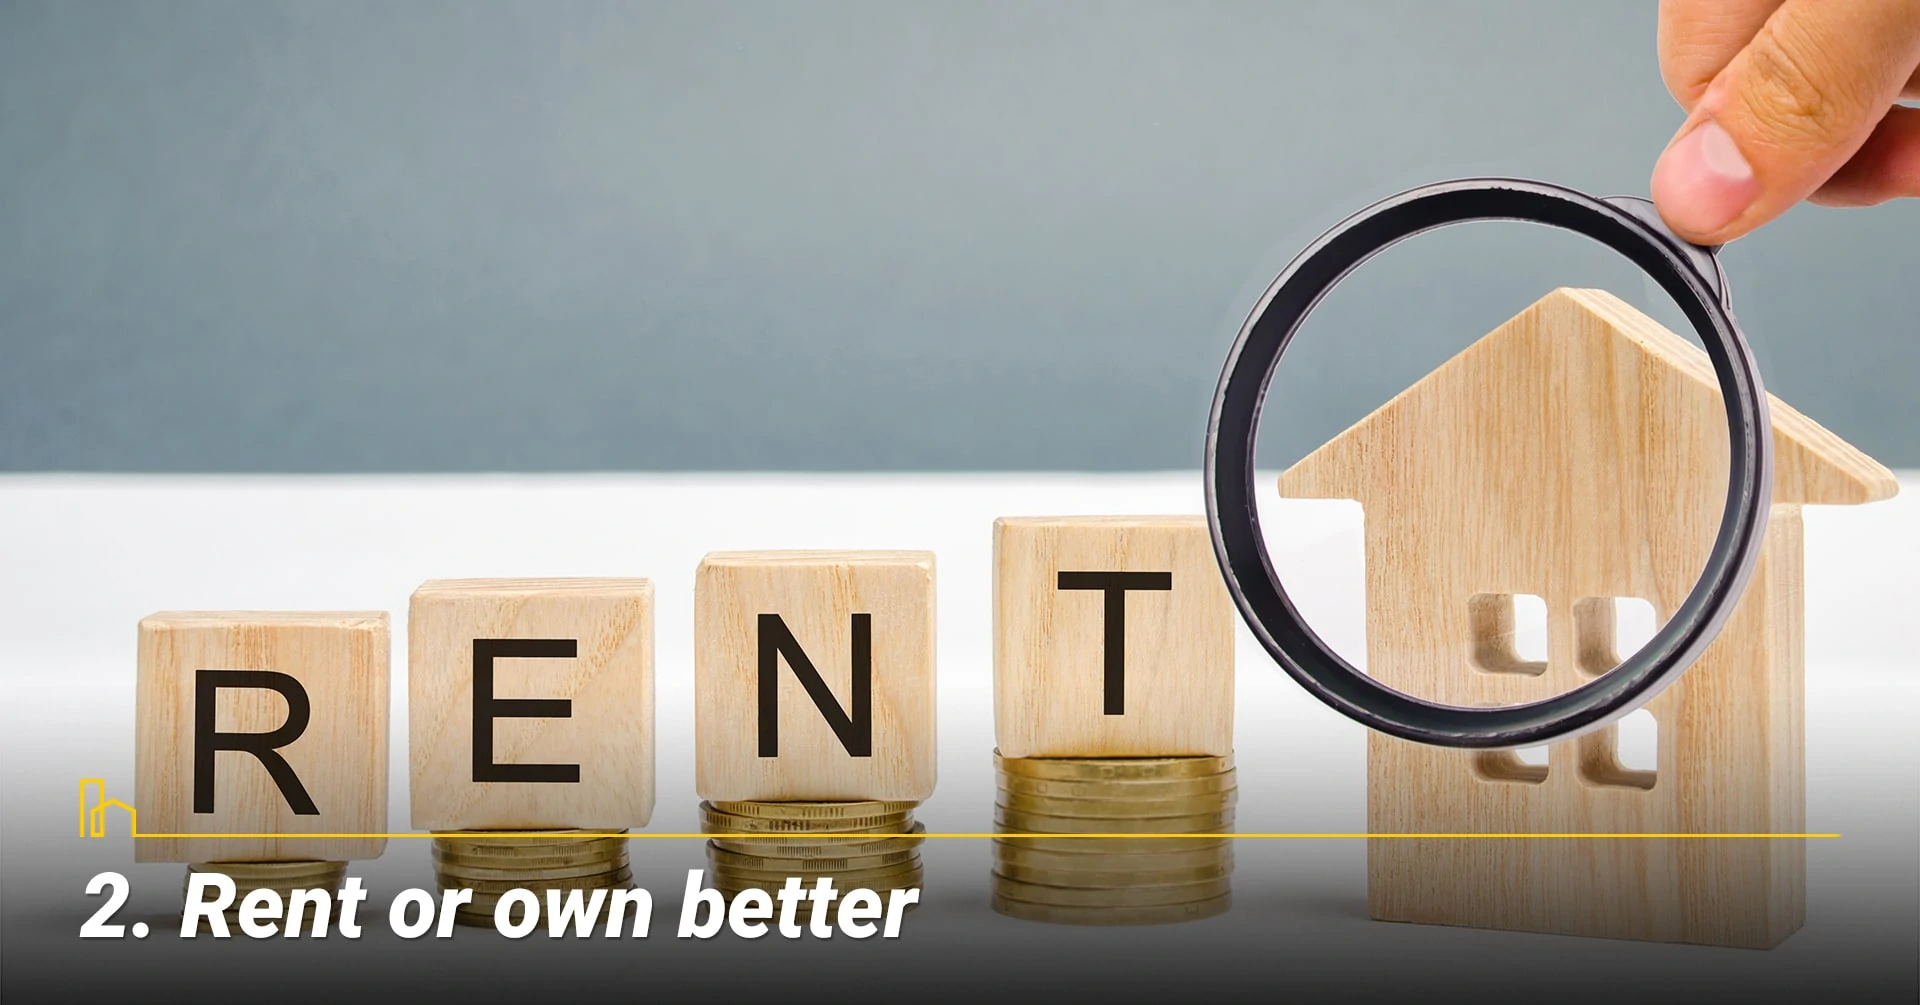 Rent or own better, buy or rent